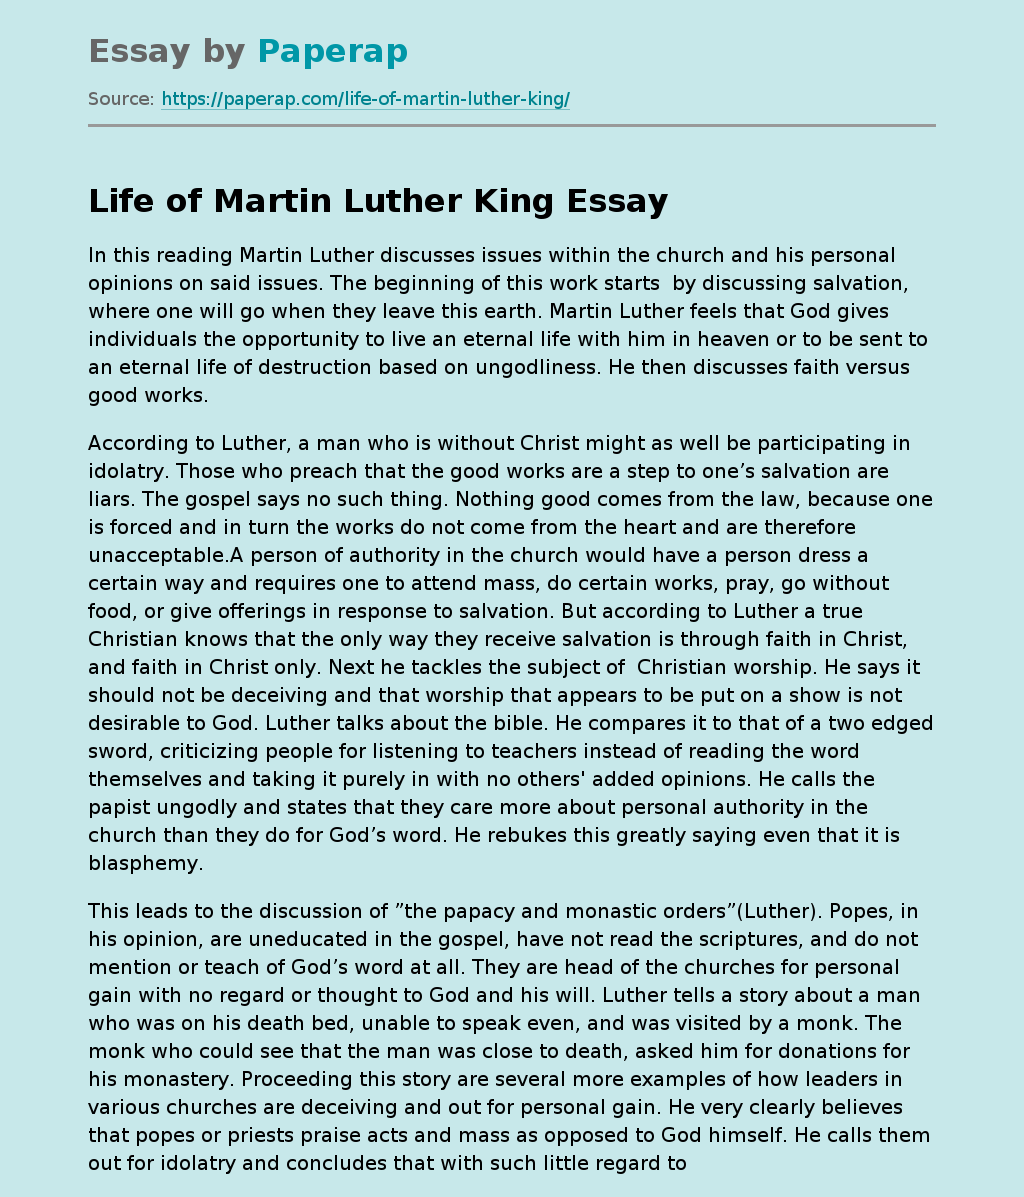 Life of Martin  Luther King